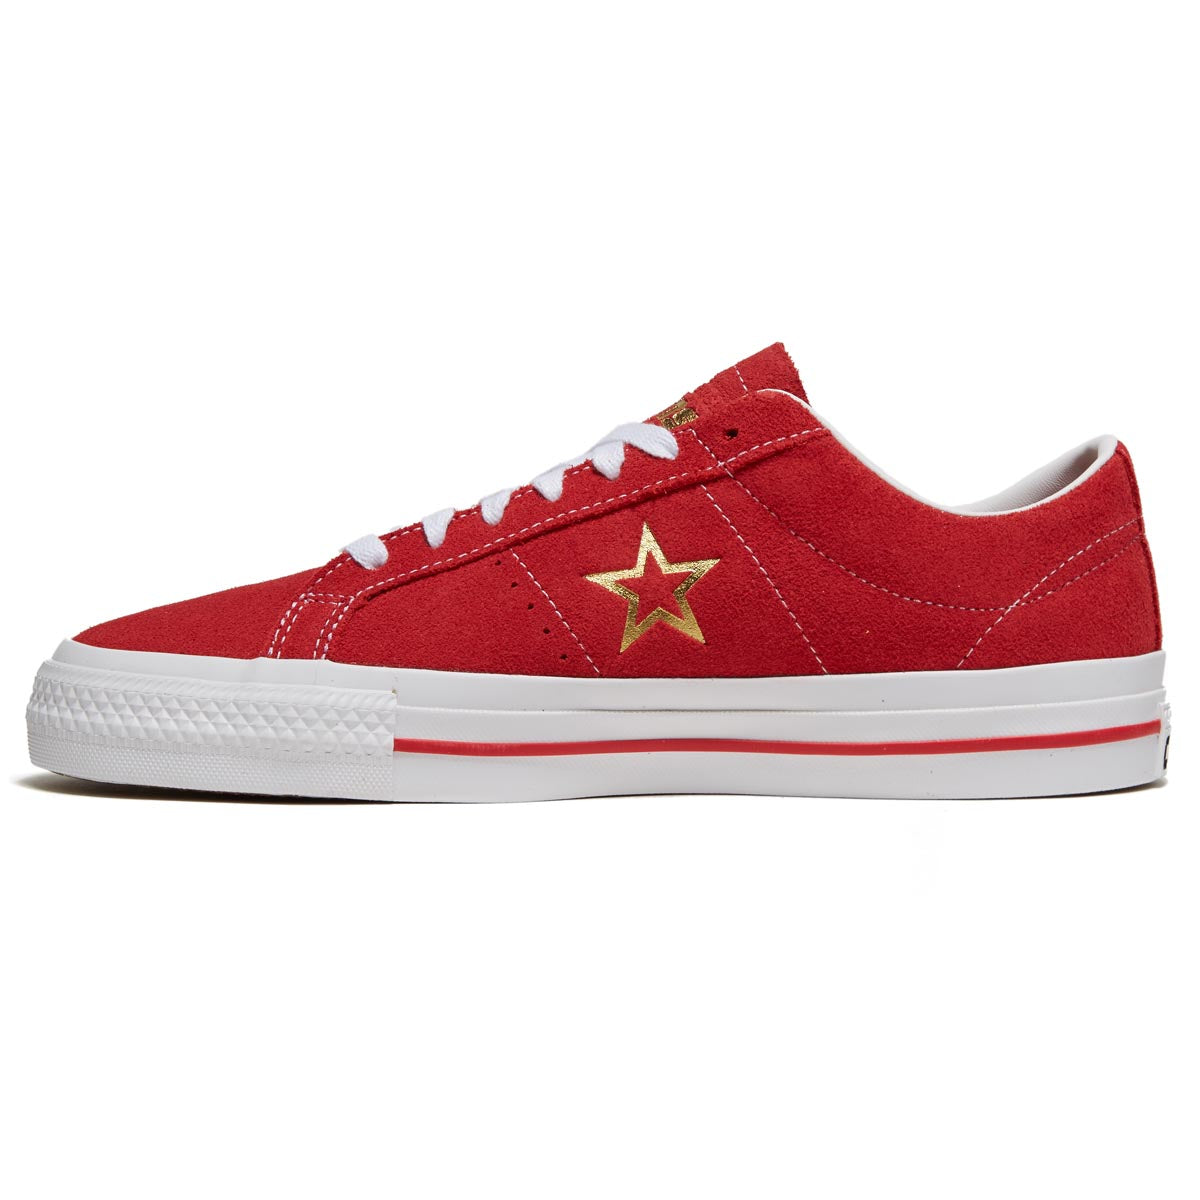 Converse One Star Pro Suede Ox Shoes - Varsity Red/White/Gold image 2